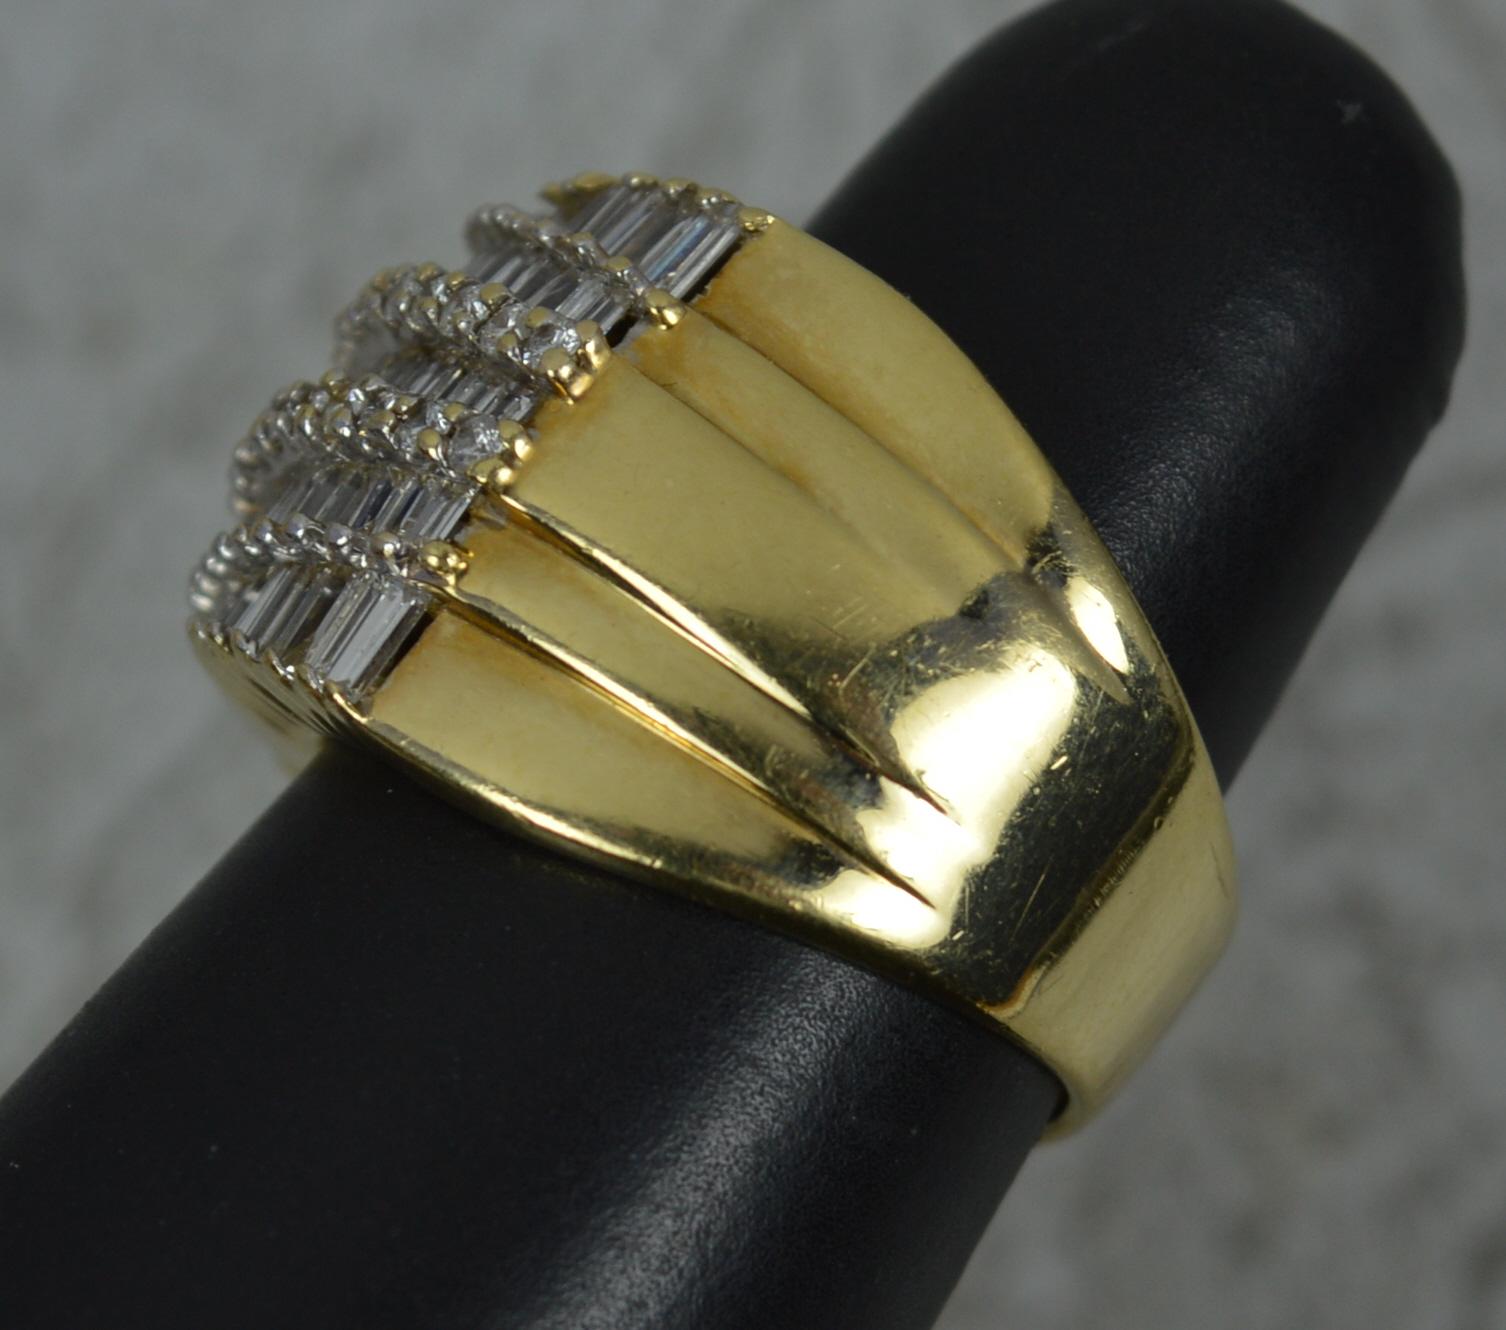 Heavy Bling 3.00 Carat Diamond and 18 Carat Yellow Gold Cluster Ring For Sale 3